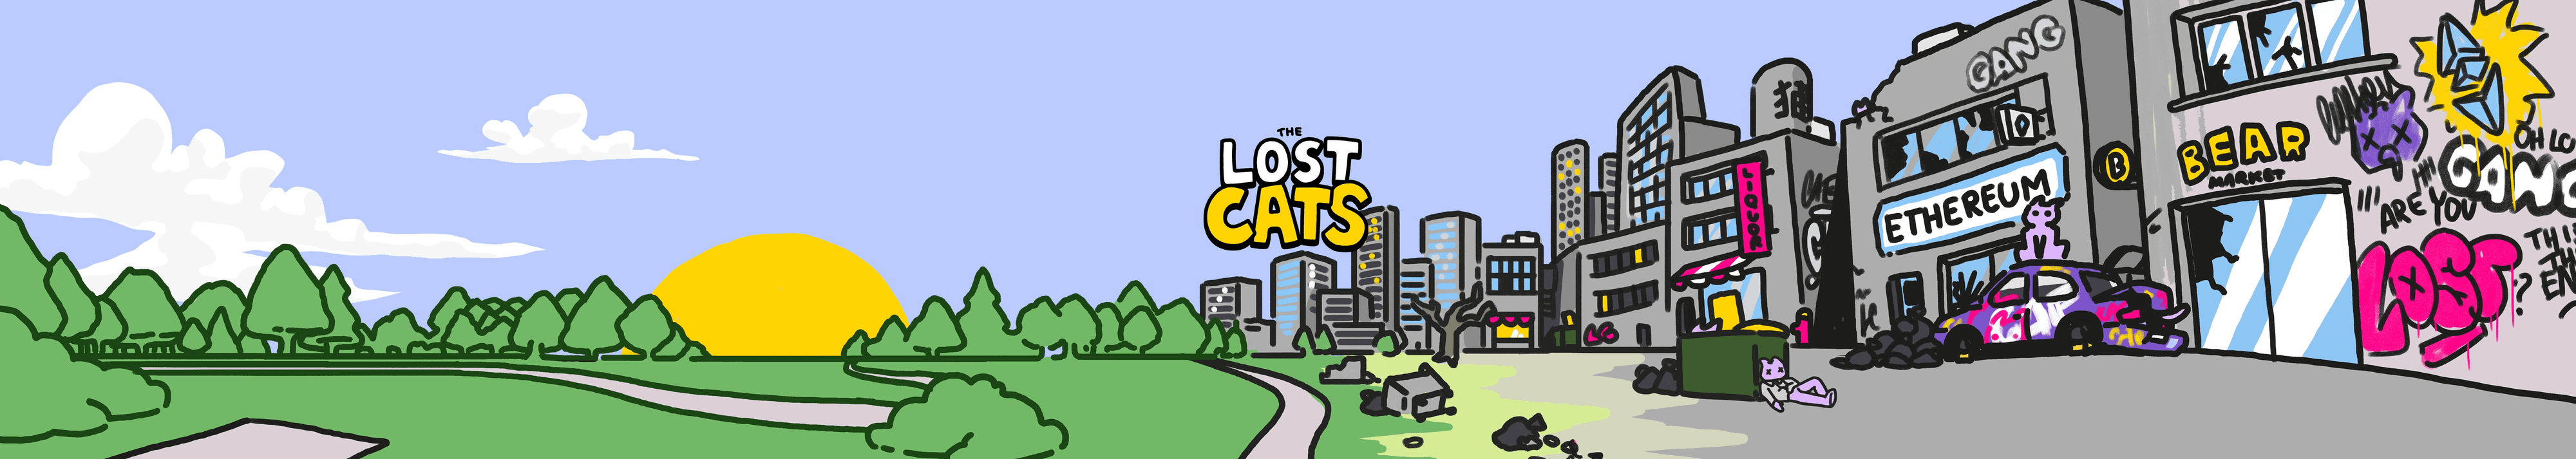 THE_LOST_CATS_VAULT banner